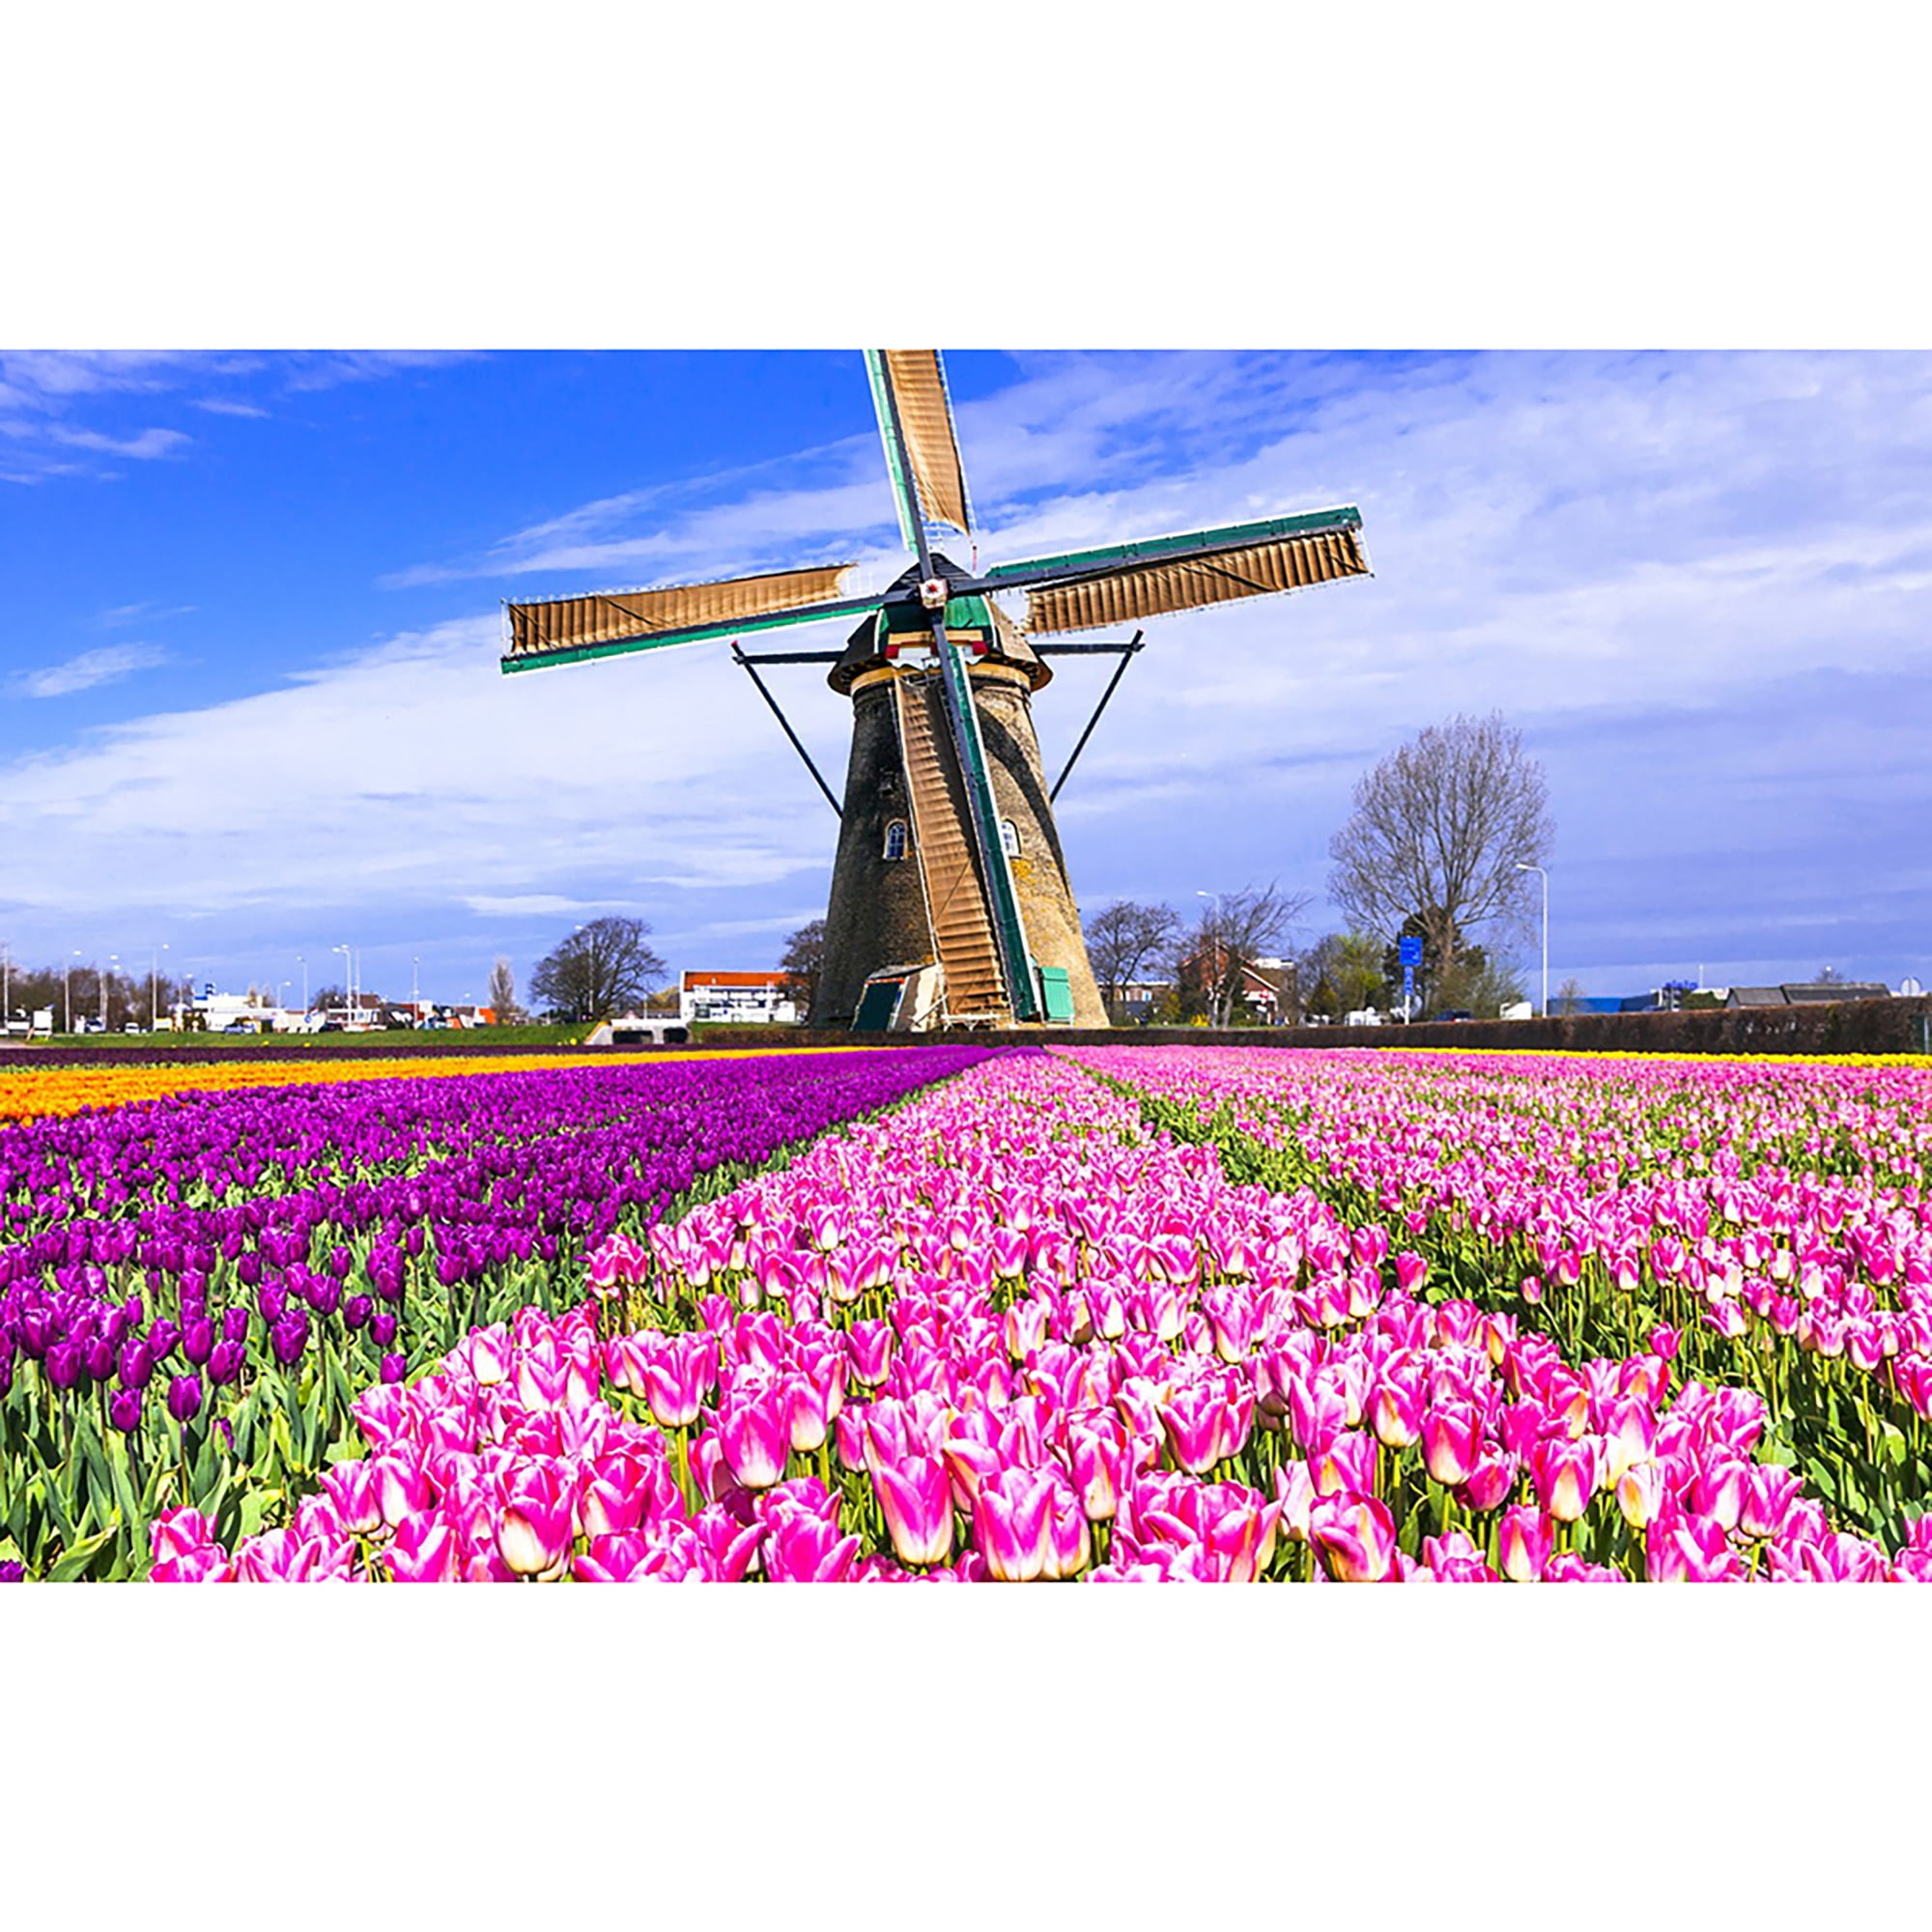 5d Diamond PAINTING KIT DIY Windmill Tulips FULL round Drill Mosaic Picture 